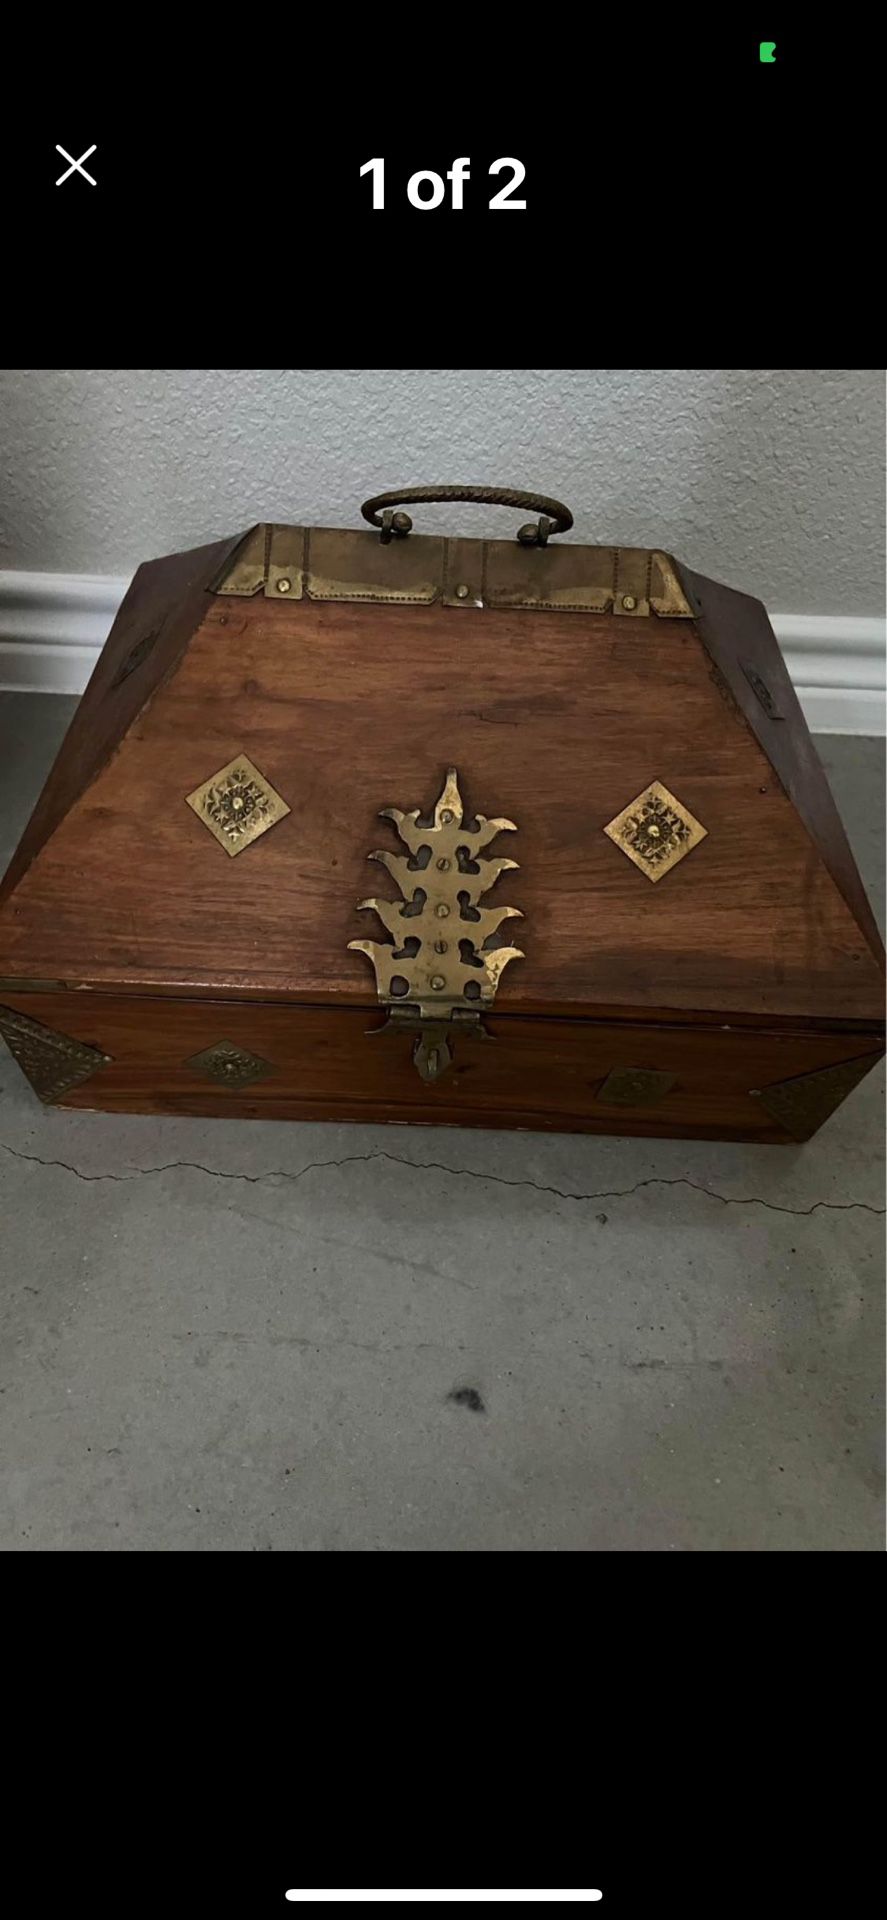 19th Century  Dowry Chest  